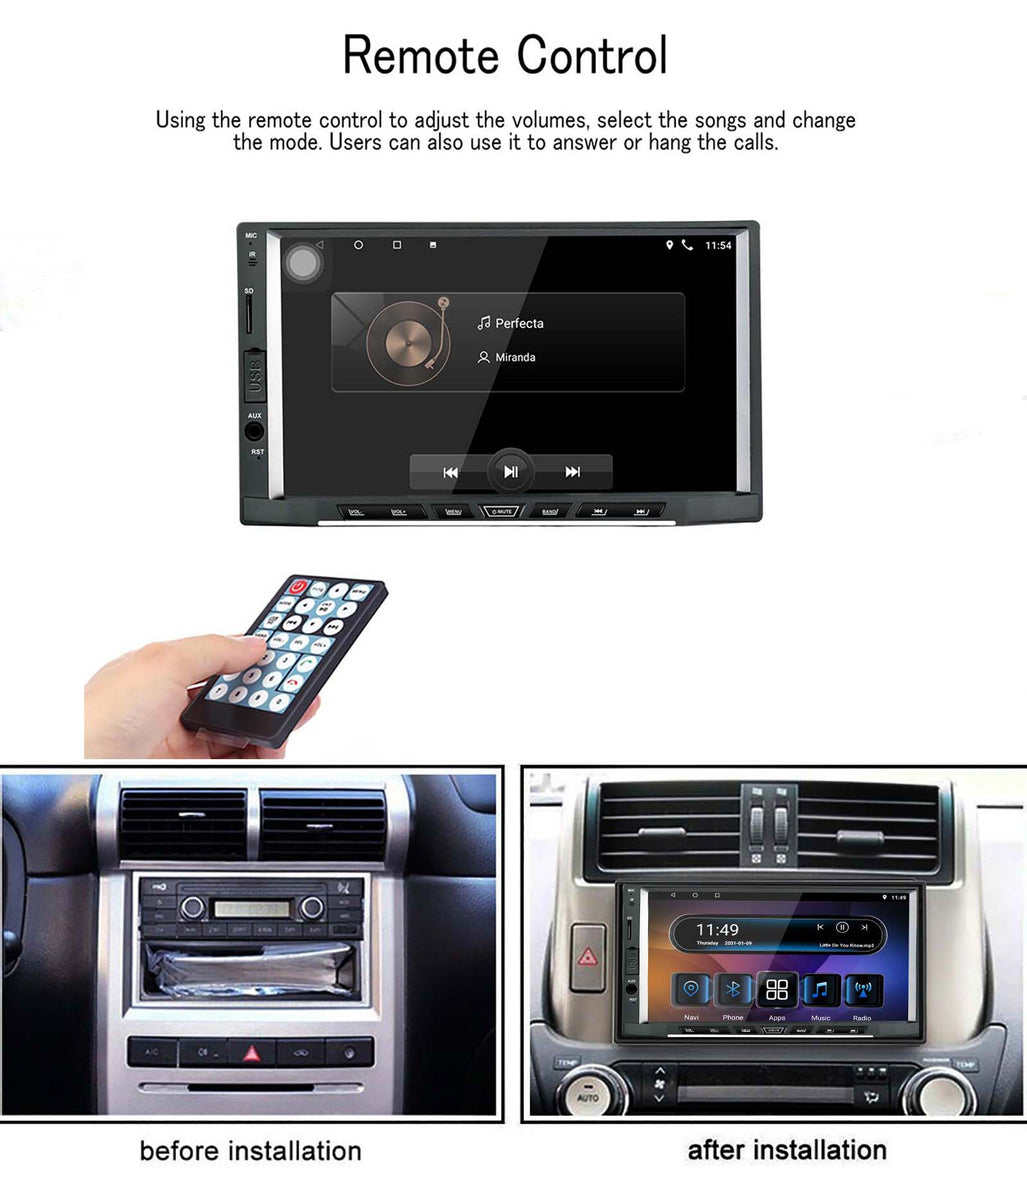 LEXXSON 1 Din Android Car Stereo Android 8.1 Octa Core 4GB RAM Head Unit  with Nav Bluetooth WIFI Support DAB+ RDS GPS USB SD Mirror Link, with 7  inch